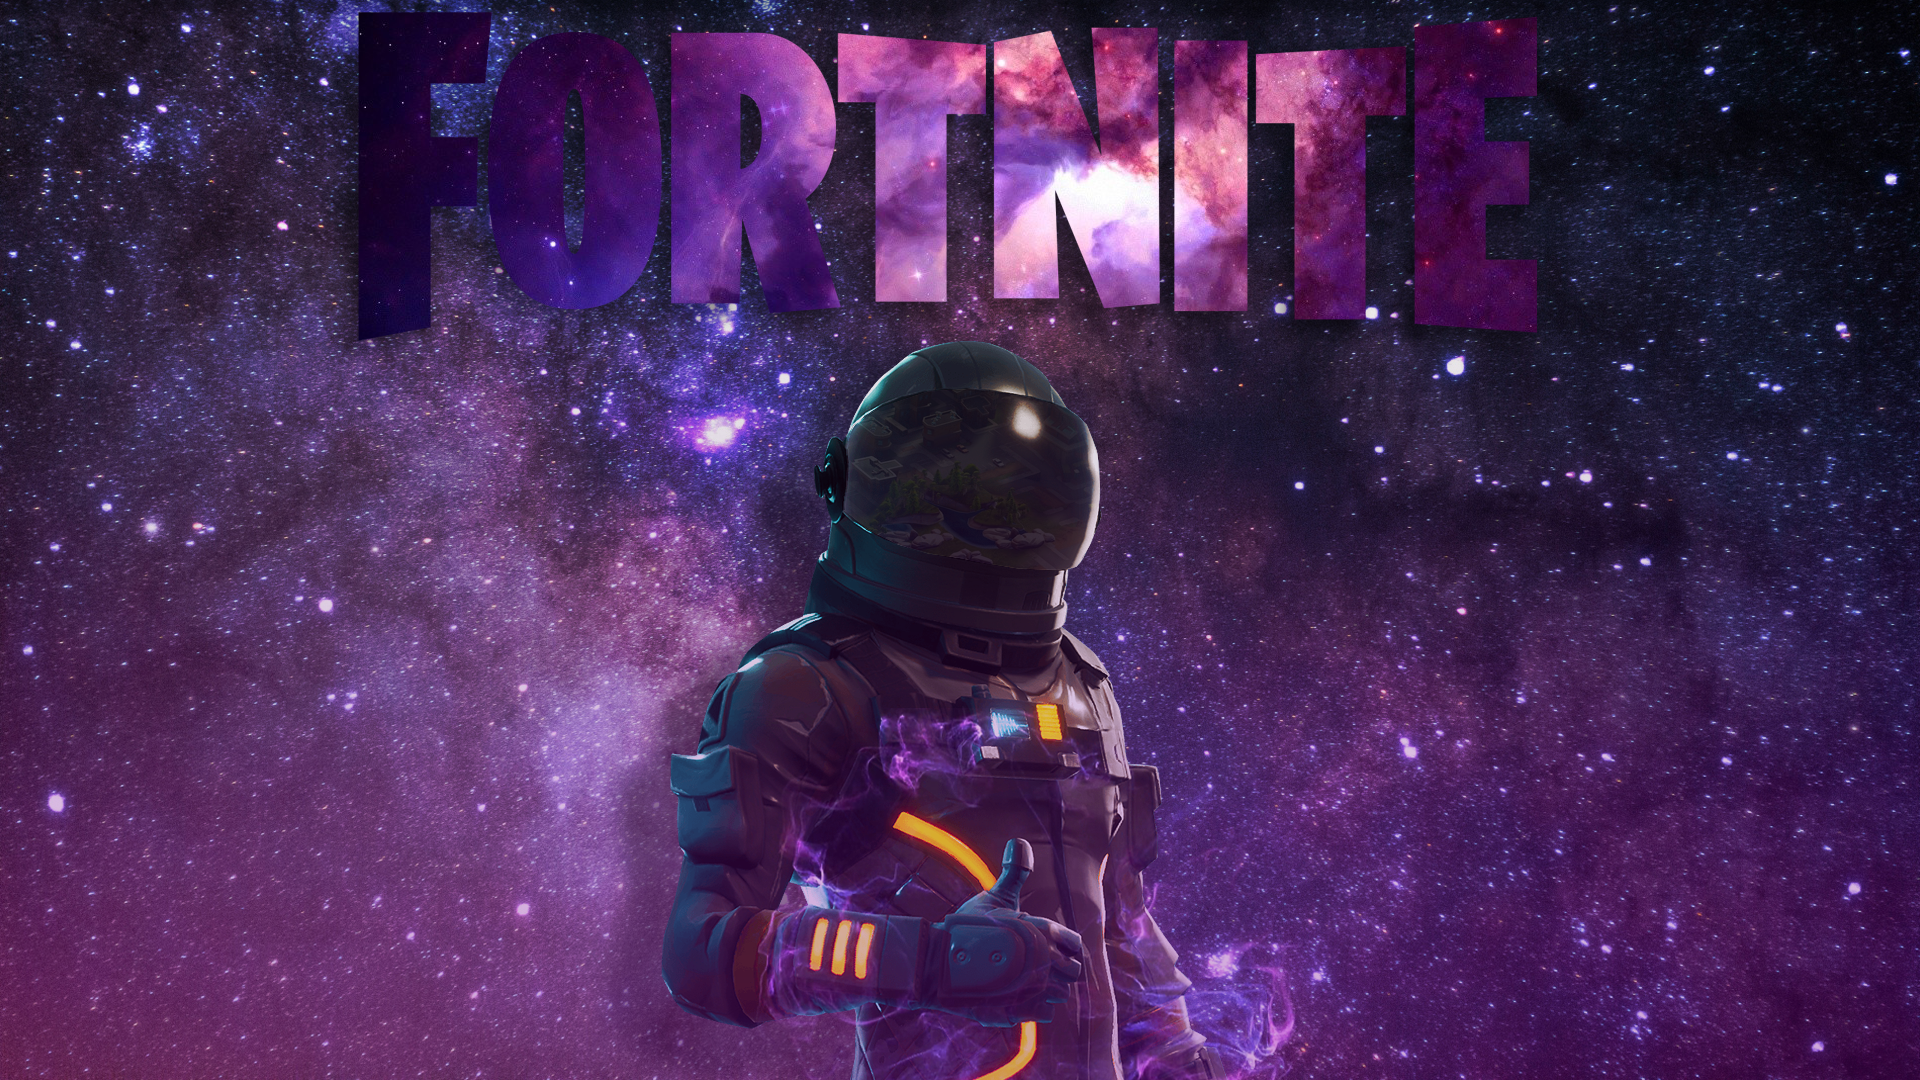 Free Download Pin By Buu Dang On Iphone 6s Plus Wallpapers Must To Have 19x1080 For Your Desktop Mobile Tablet Explore 22 Galaxy Fortnite Wallpapers Galaxy Fortnite Wallpapers Galaxy